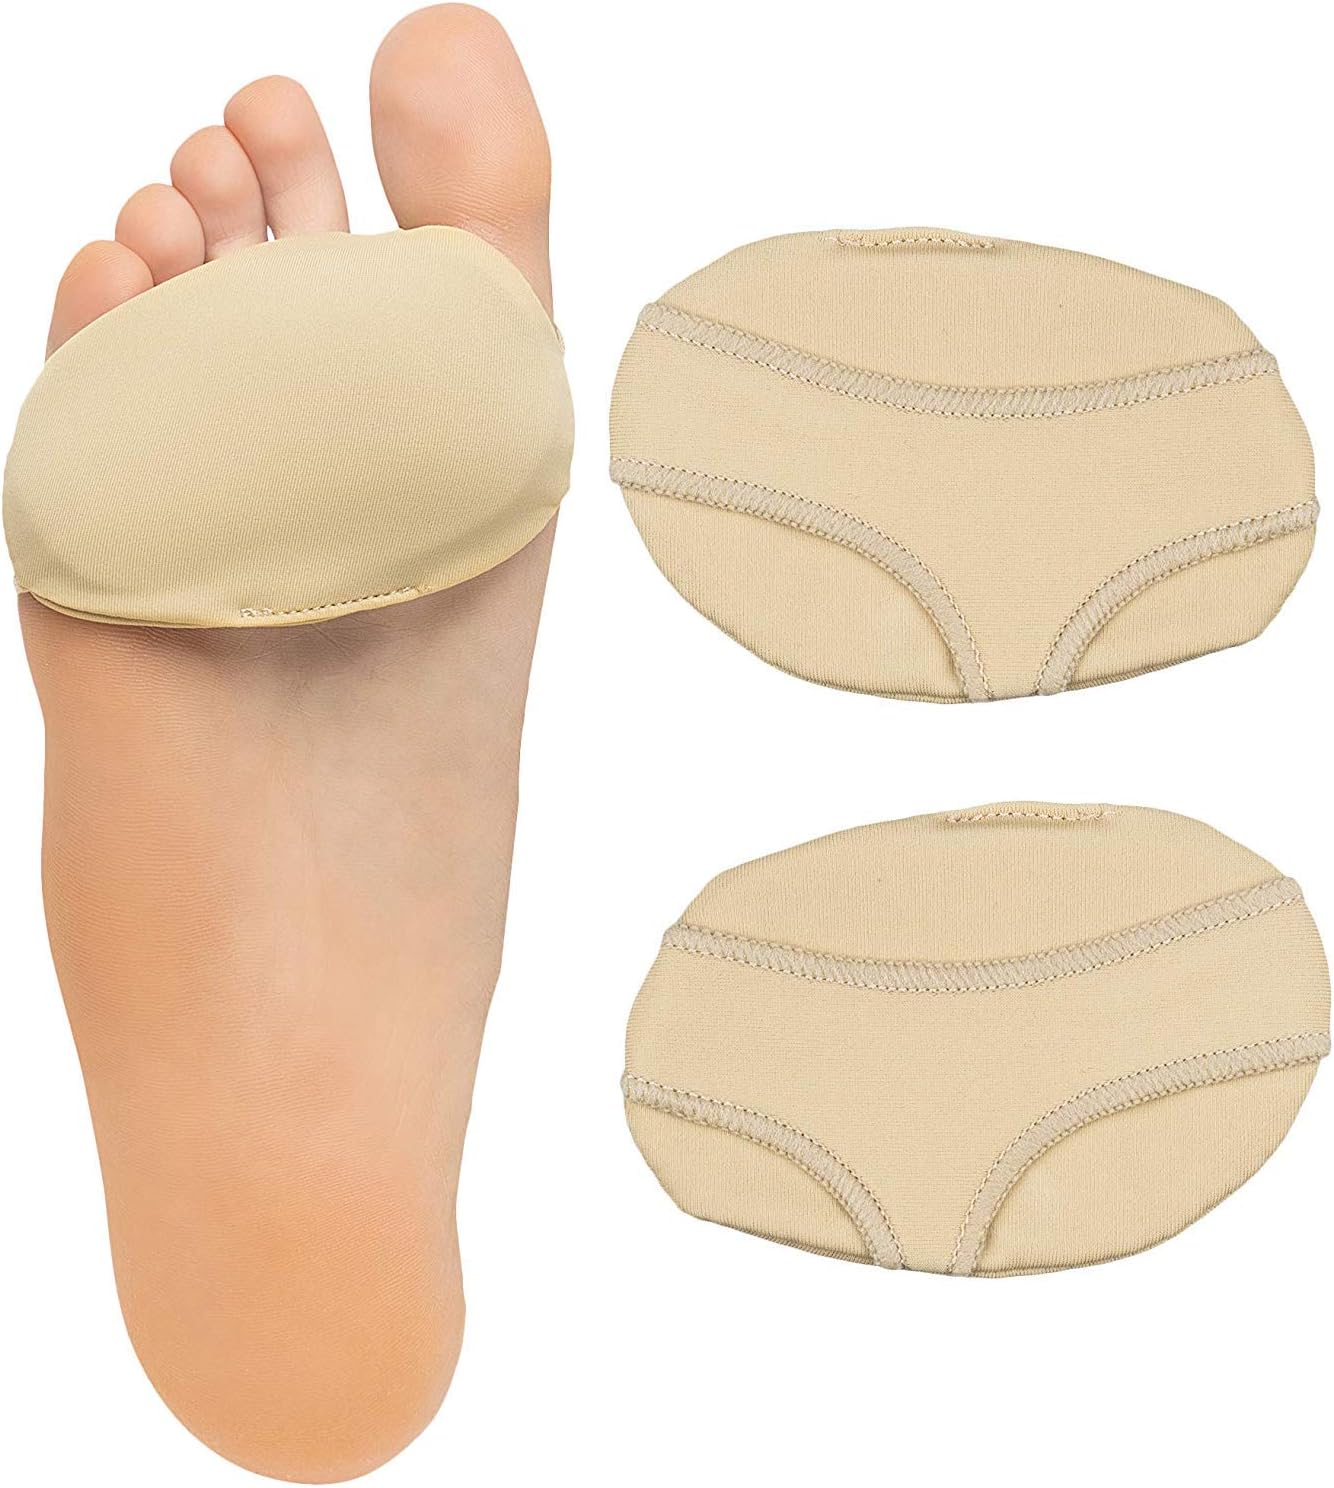 ZenToes Ball of Foot Pads Metatarsal Cushions for [...]